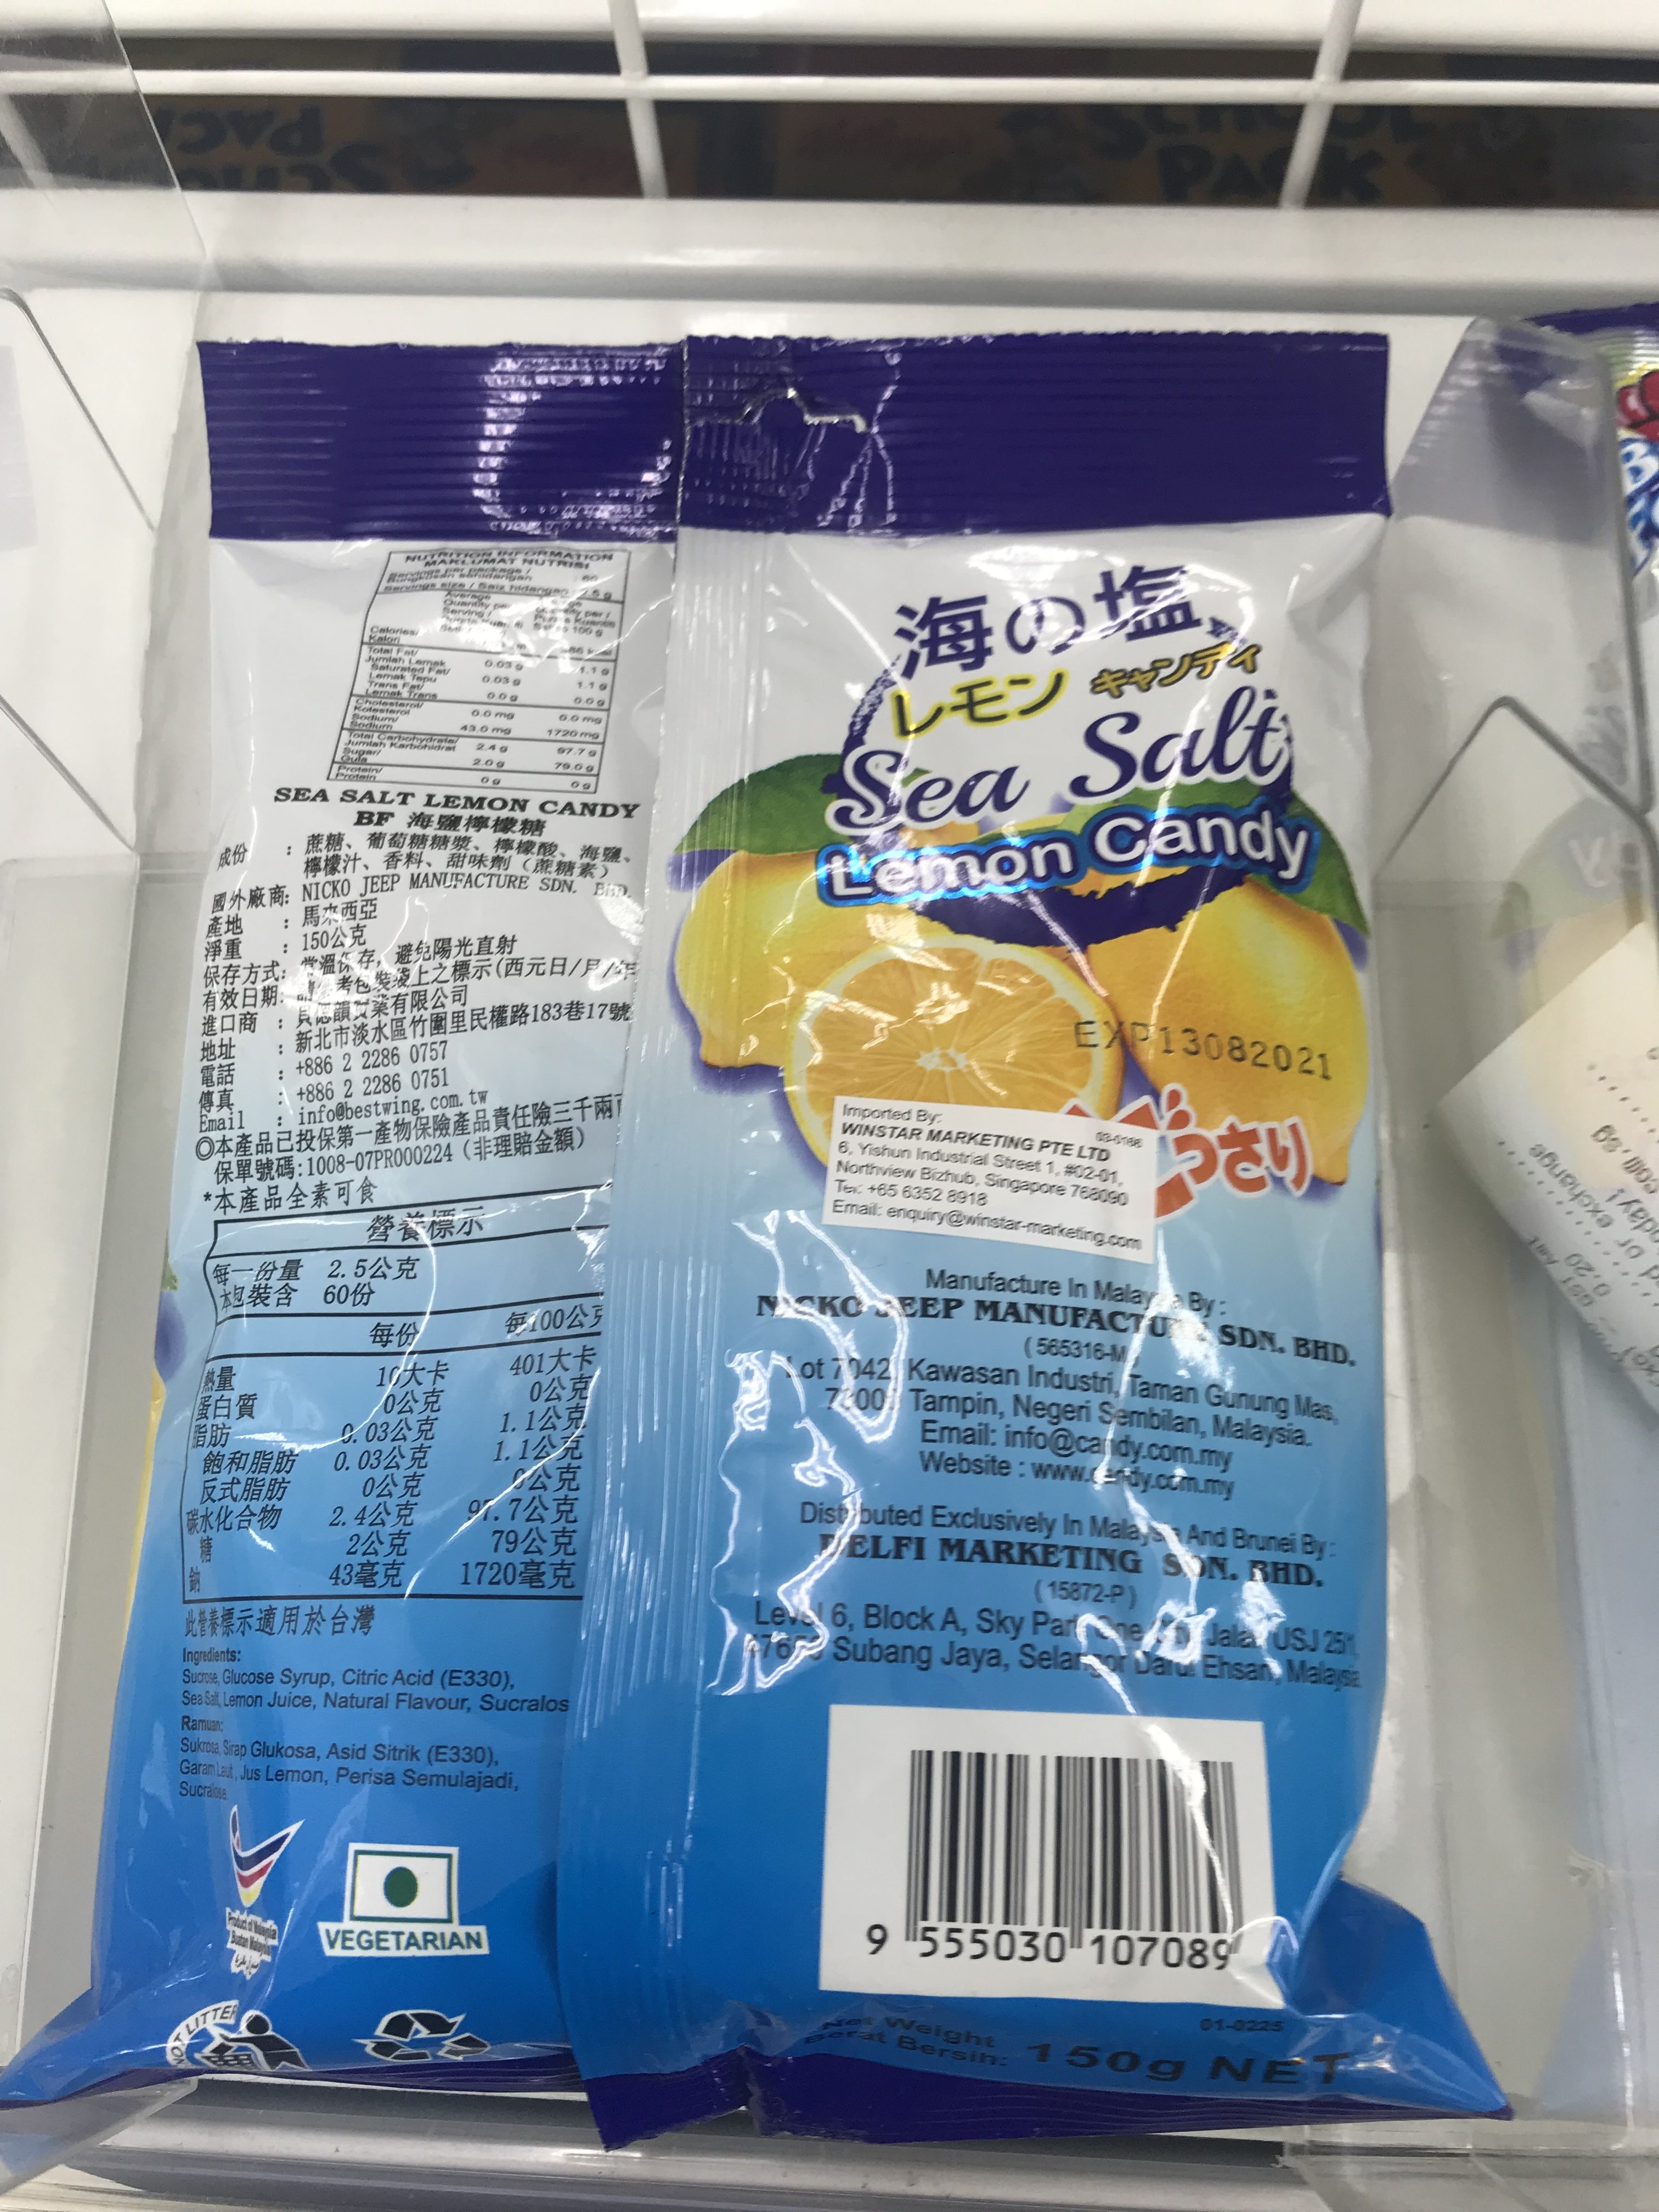 Big Foot Sea Salt Lemon Candy now available at Giant Singapore for $2 - 3